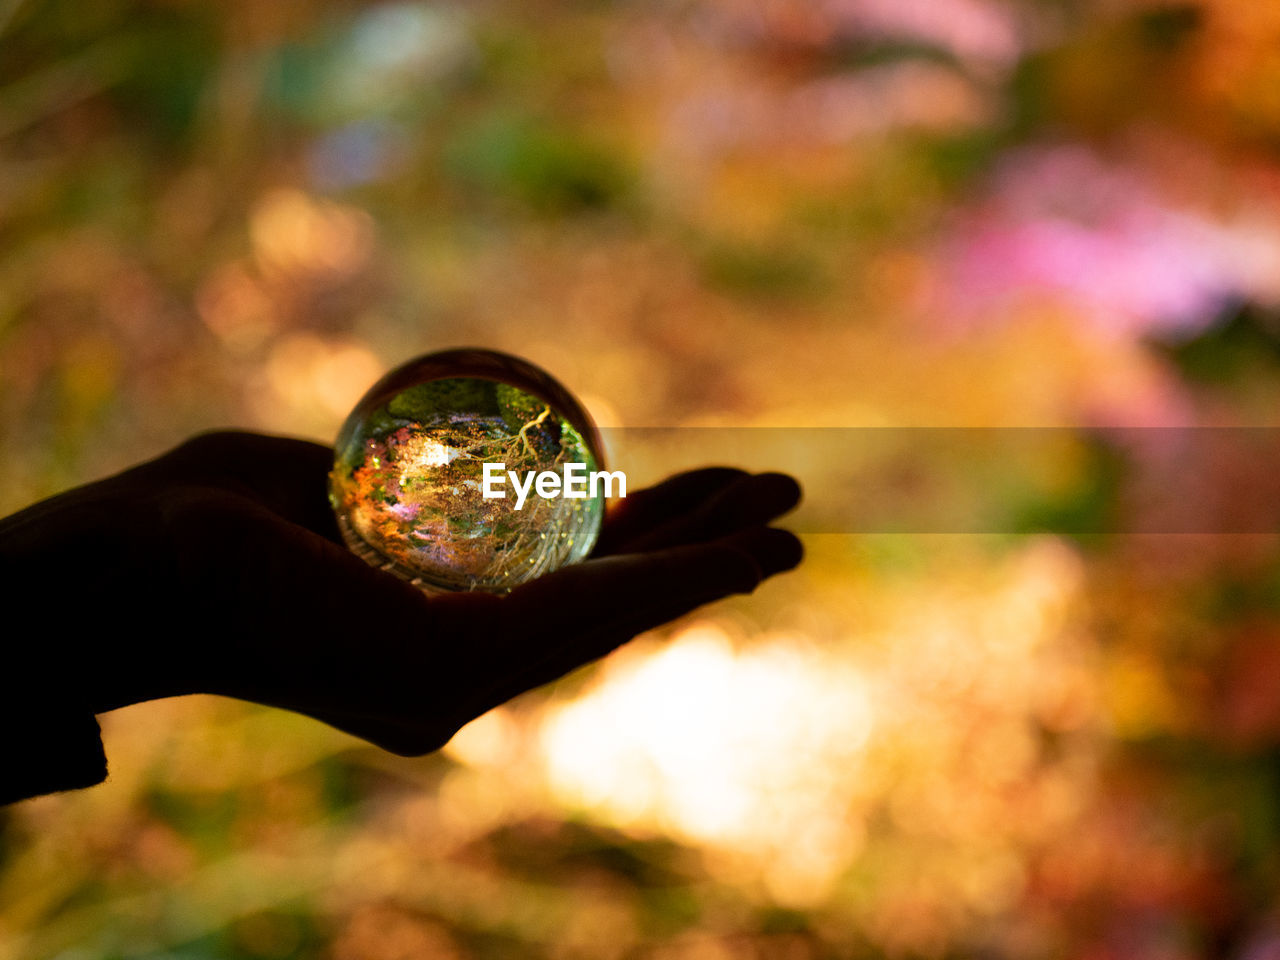 CLOSE-UP OF HUMAN HAND HOLDING CRYSTAL BALL